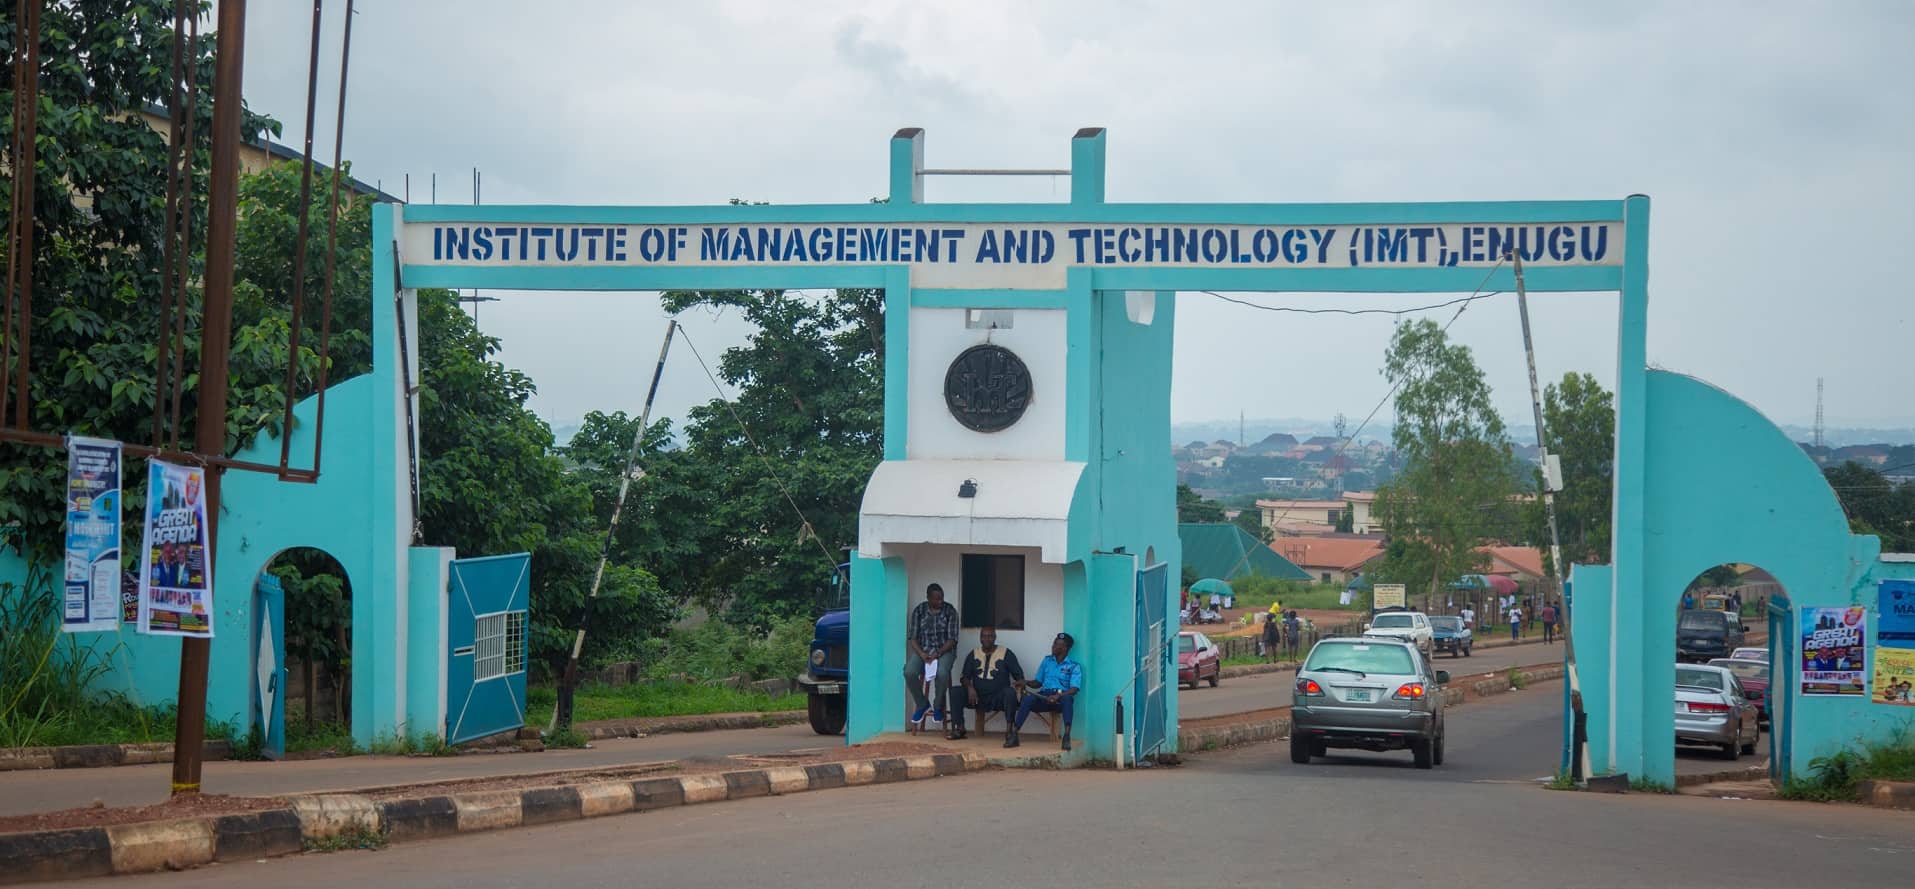 Institute of Management and Technology (IMT) HND Admission Form for 2022/2023 Academic Session | Full and Part-time